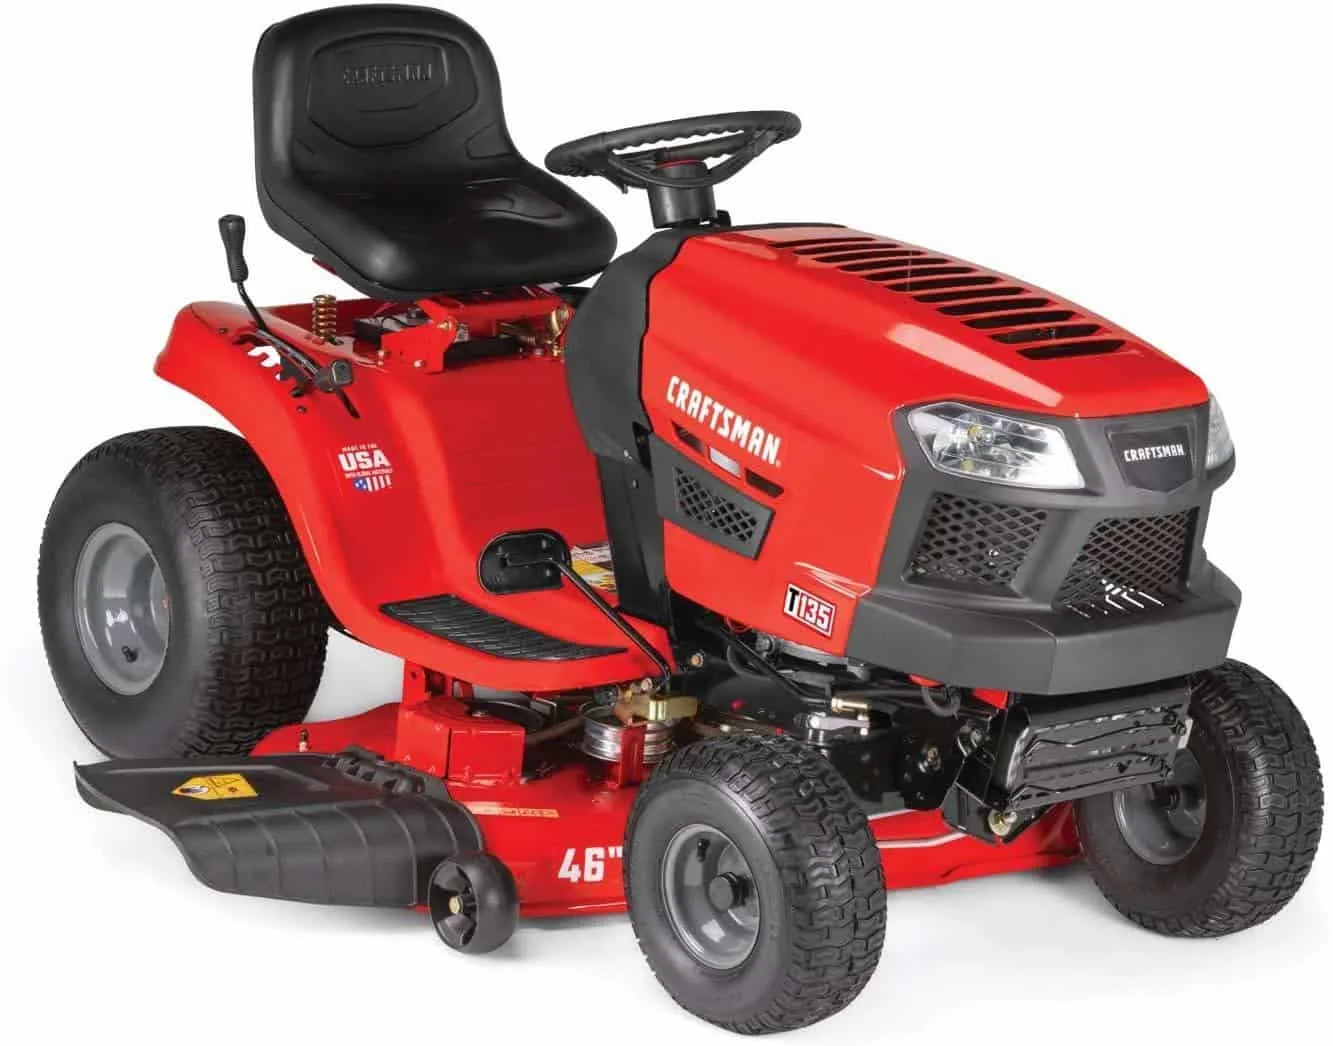 Craftsmen Gas Powered Lawn Mower Review - Best Lawn Tractor for Hills